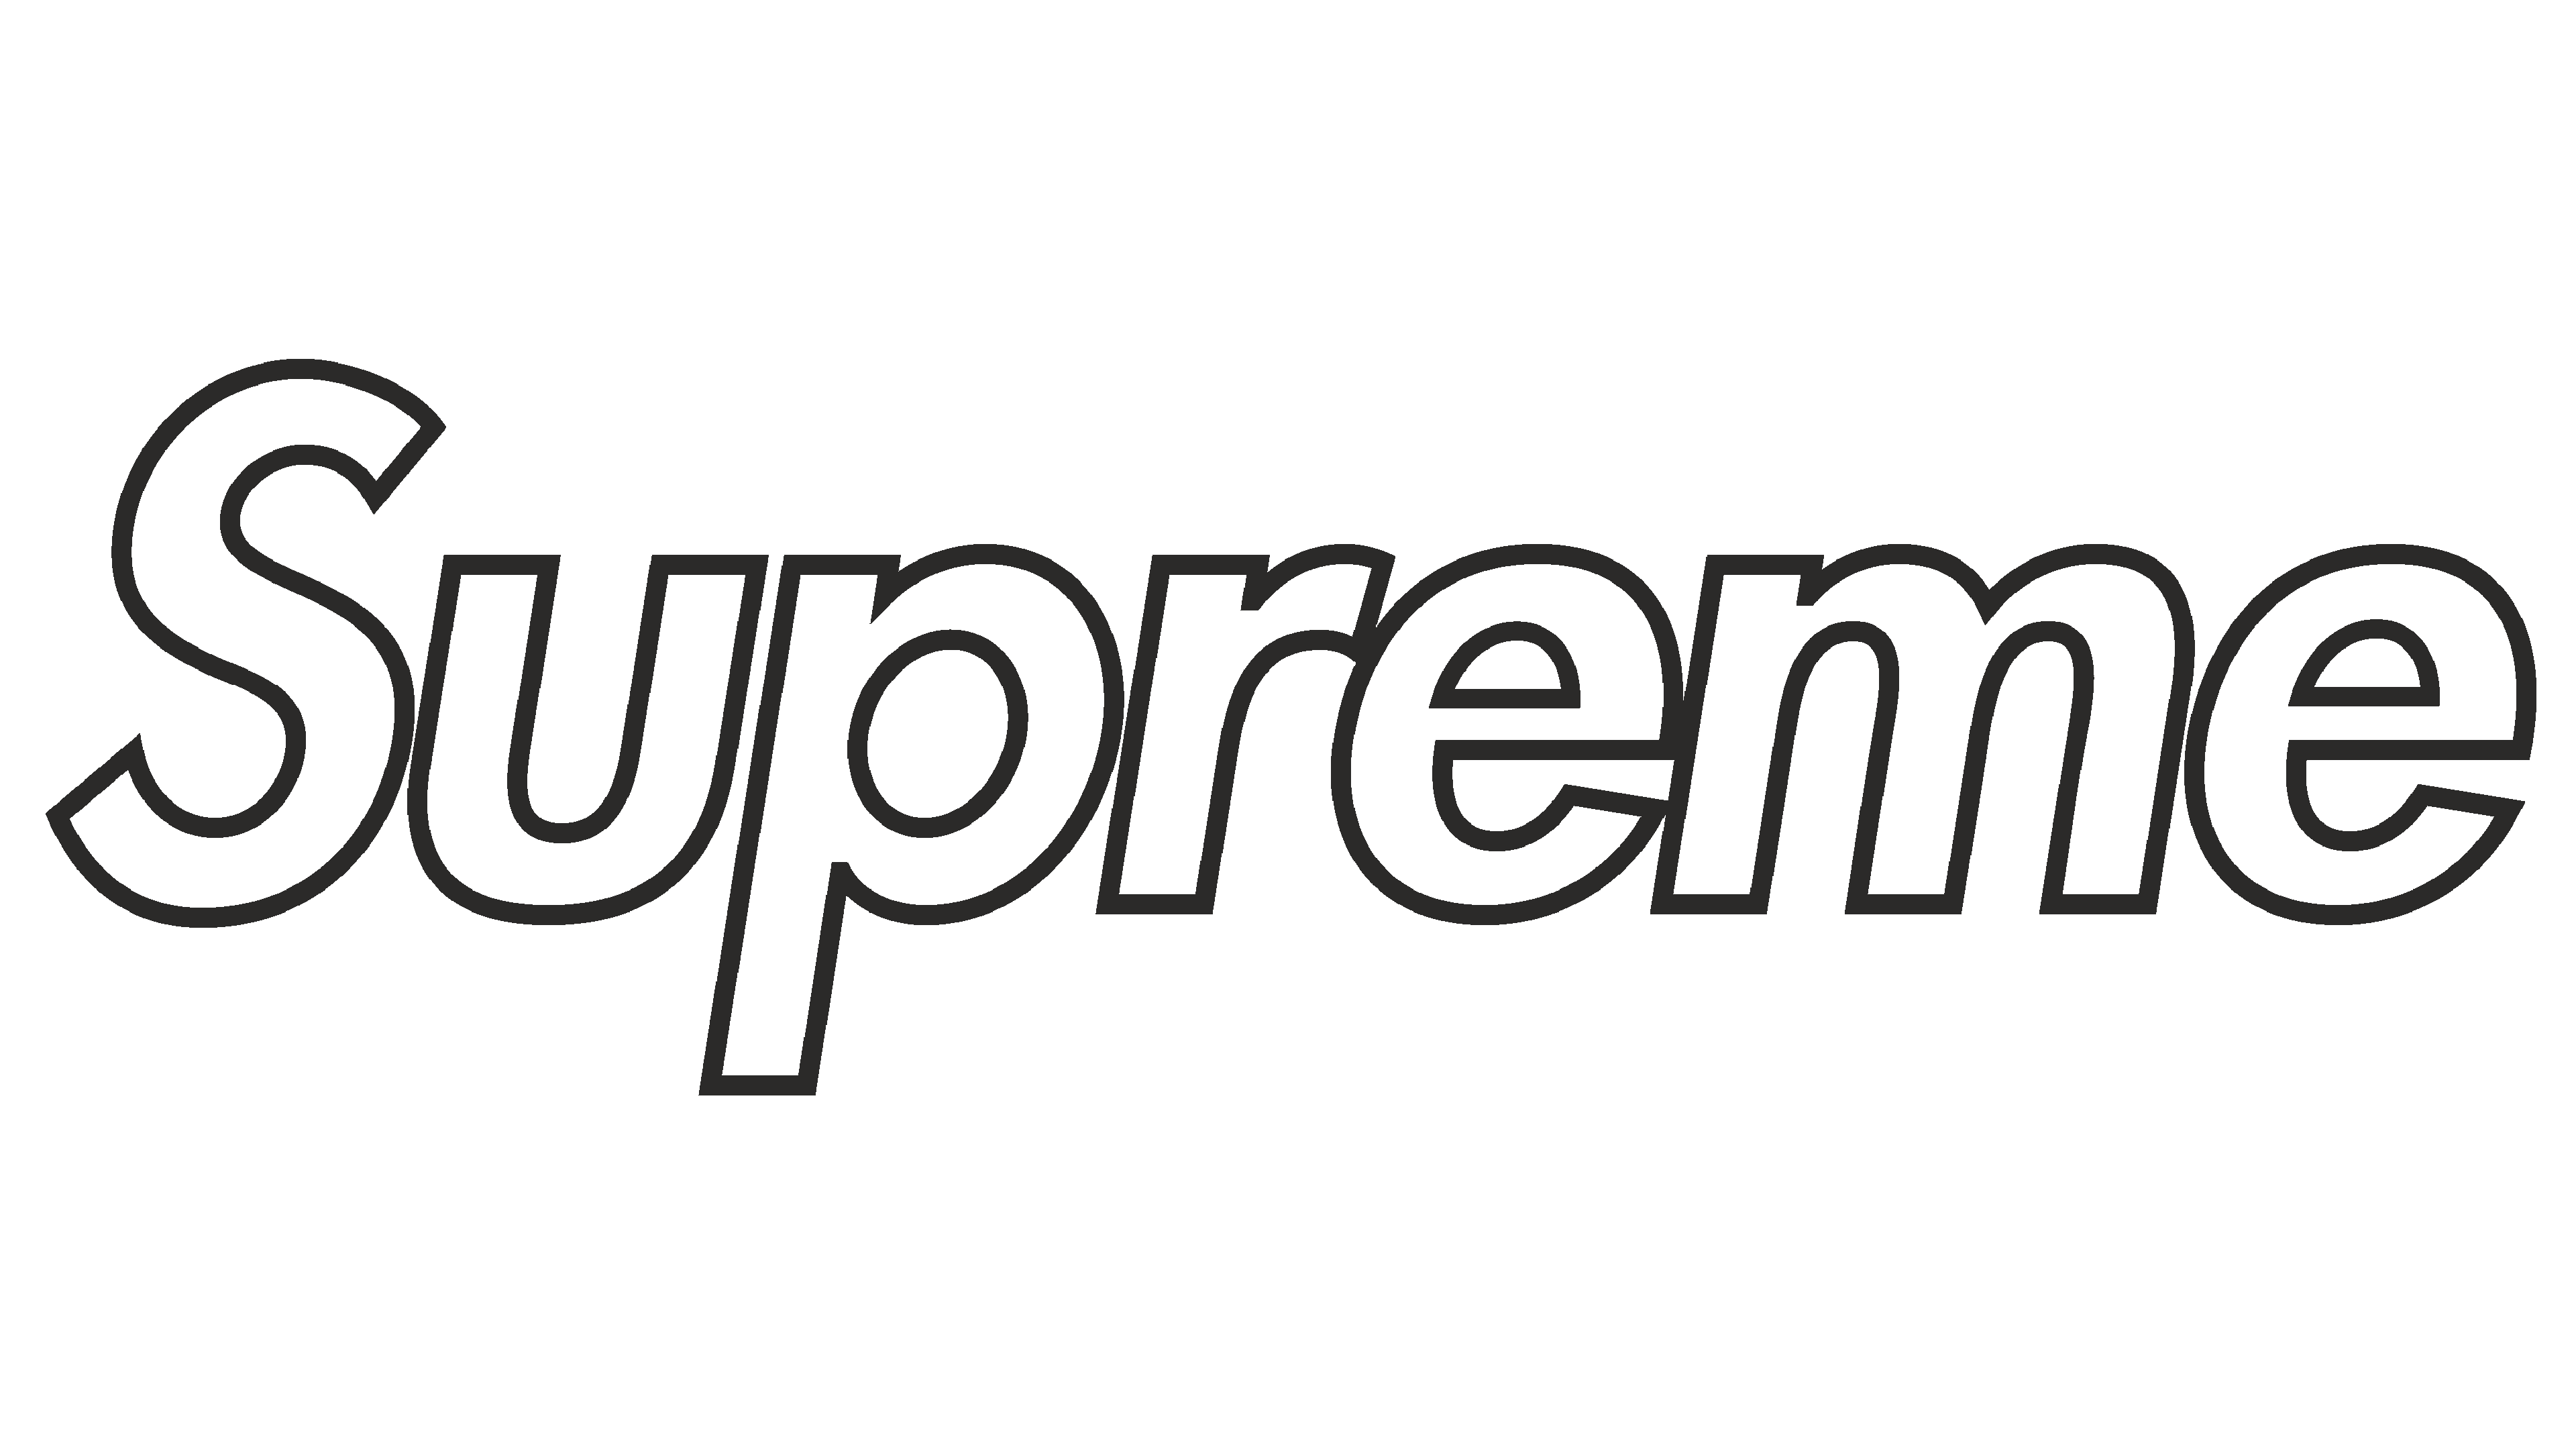 Supreme Logo and sign, new logo meaning and history, PNG, SVG